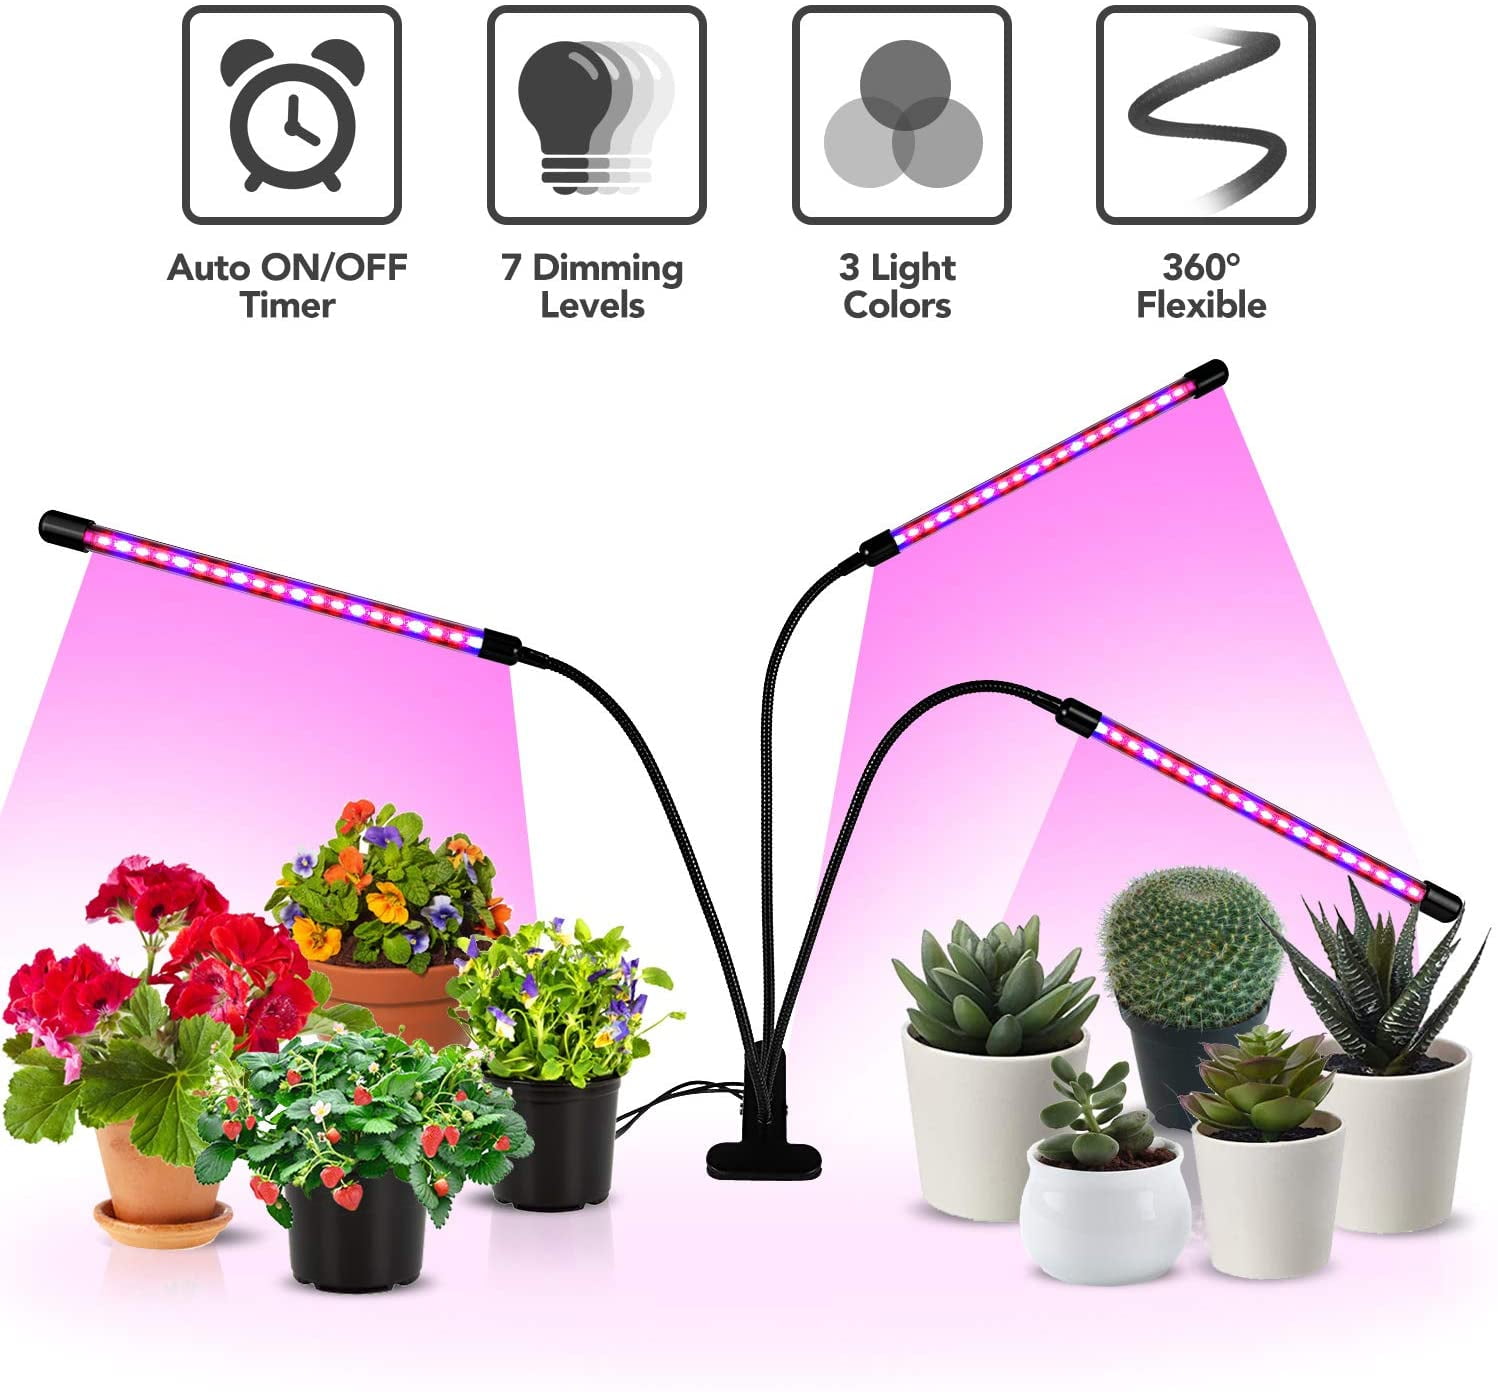 iPower 60W 4-Head 80 LED Full Spectrum Grow Light for Indoor Plants 10 Dimmable 